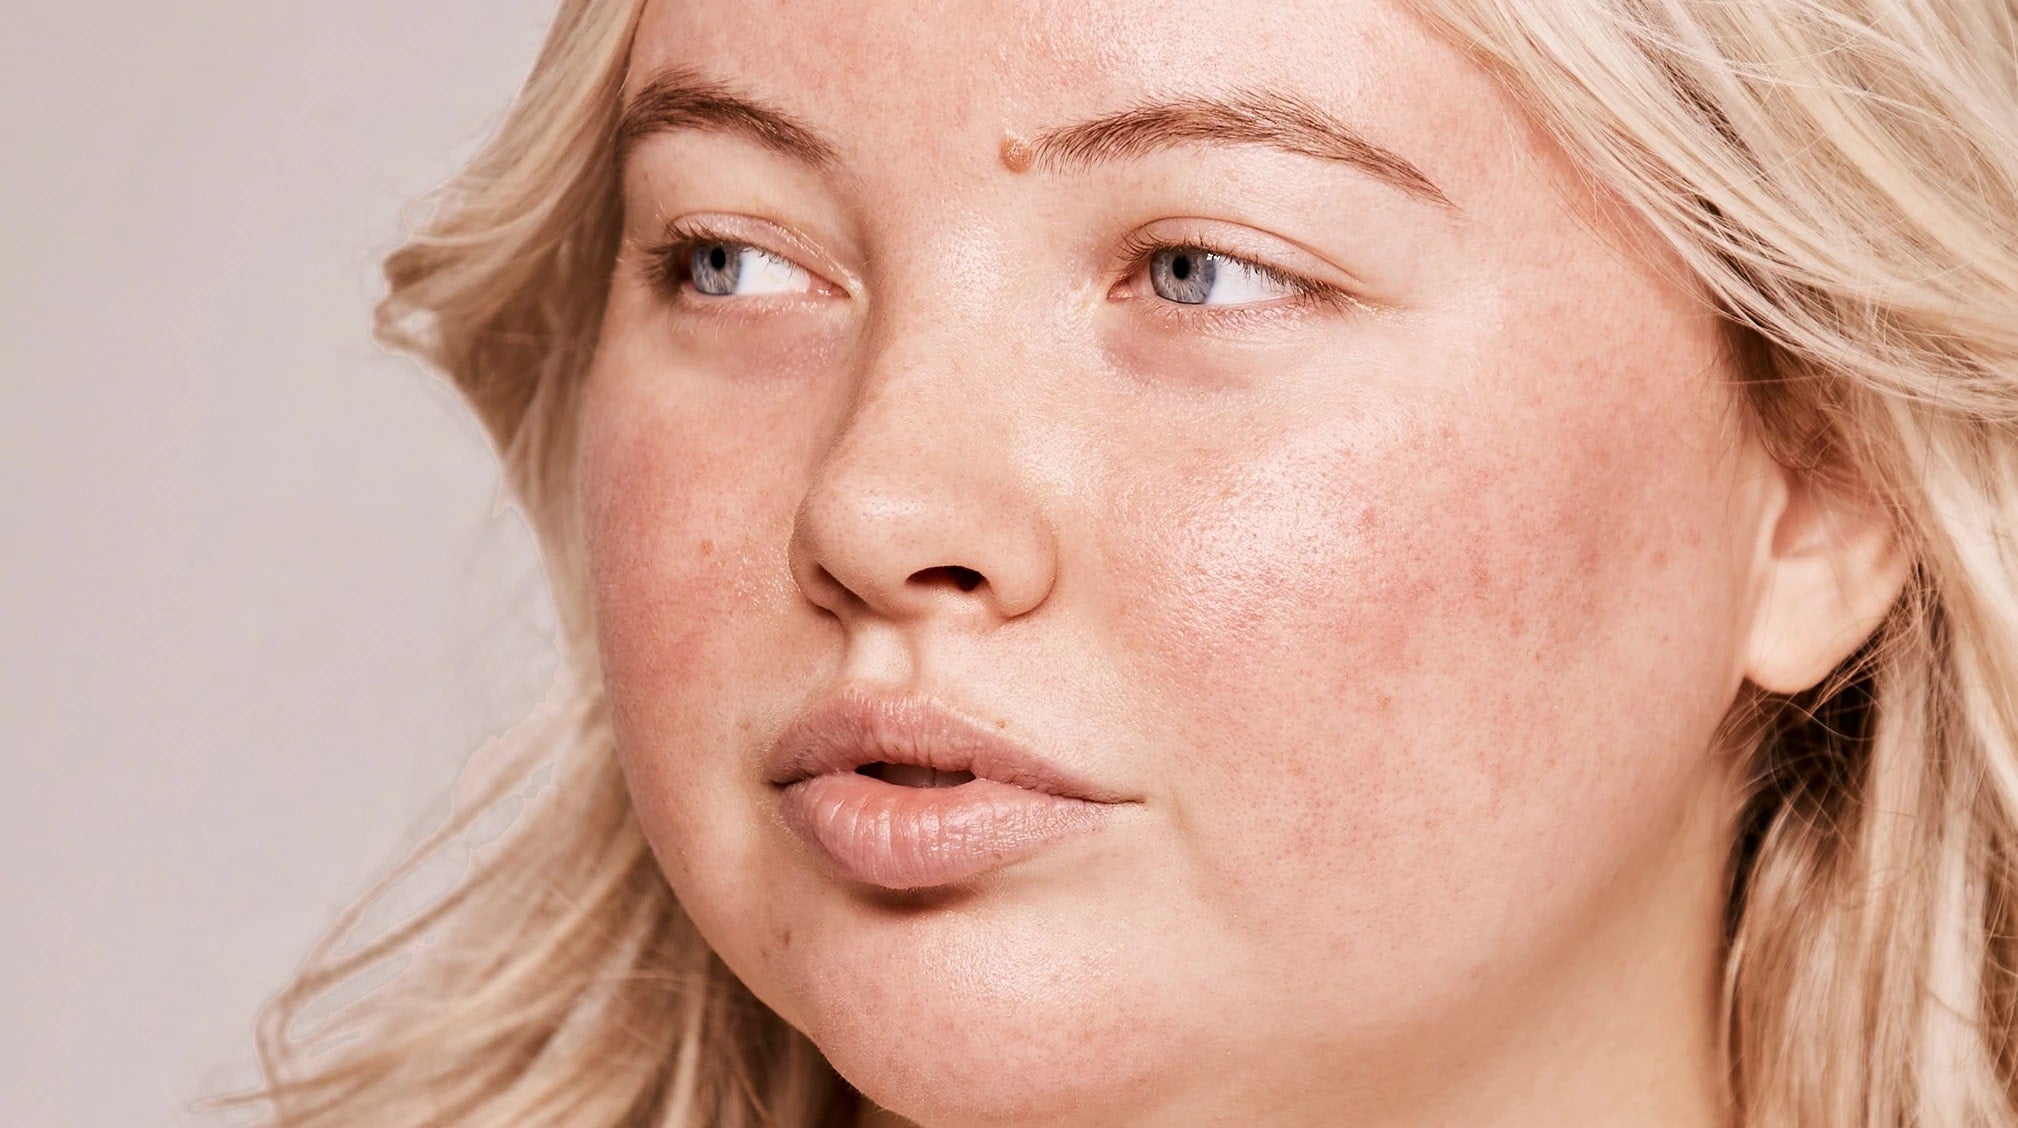 Is It Rosacea or Just Redness? Here Are 3 Derm-Recommended Ways to Tell the Difference.